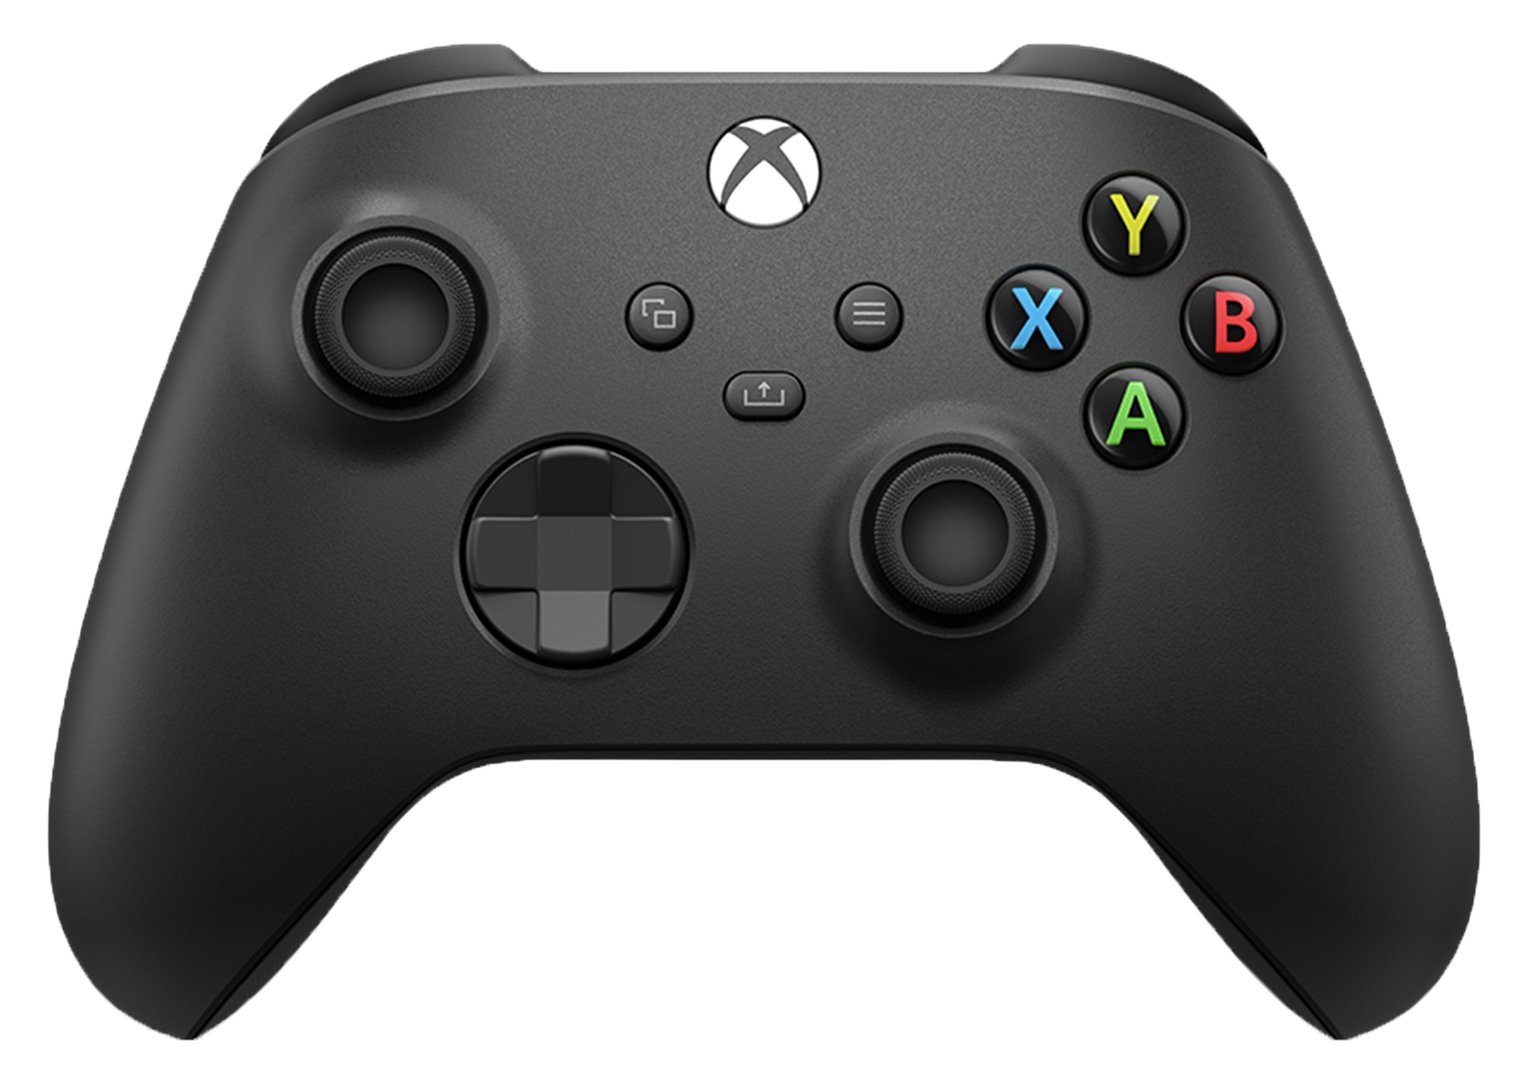 Official Xbox Series X/S Wireless Controller - Carbon Black